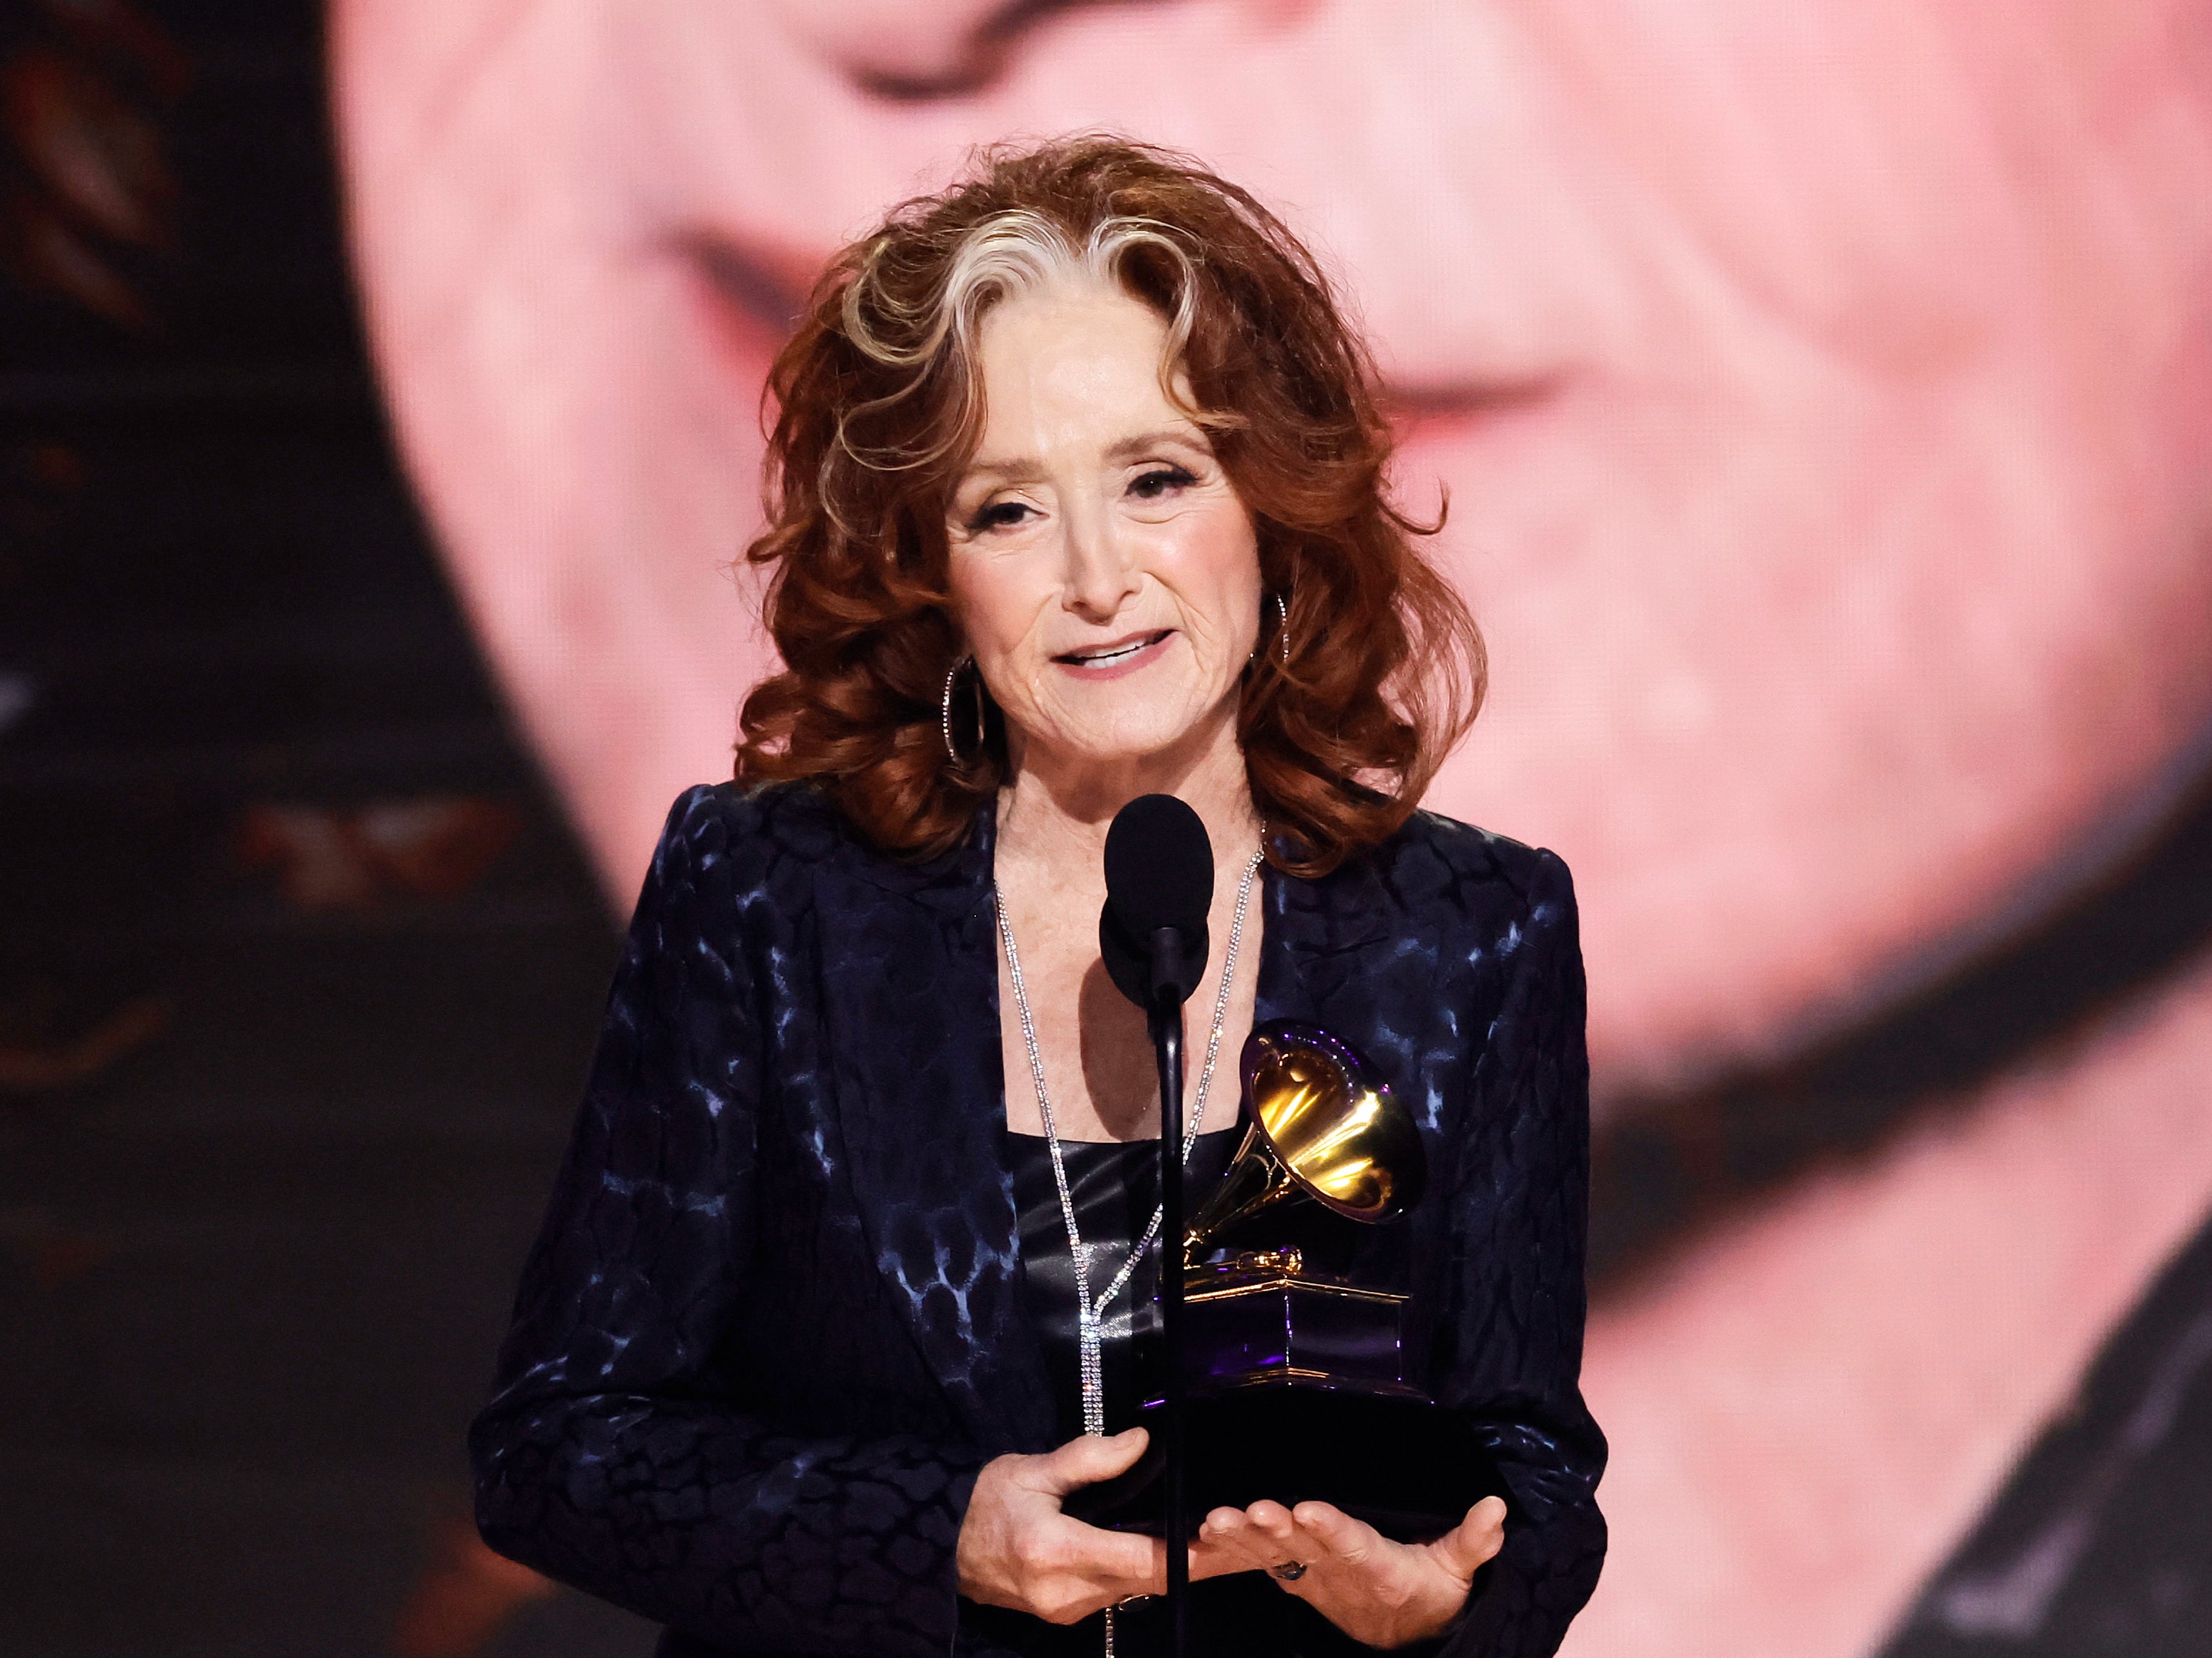 Bonnie Raitt accepts the Song Of The Year award for “Just Like That” onstage during the 65th GRAMMY Awards at Crypto.com Arena on February 05, 2023 in Los Angeles, California. (Photo by Kevin Winter/Getty Images for The Recording Academy)